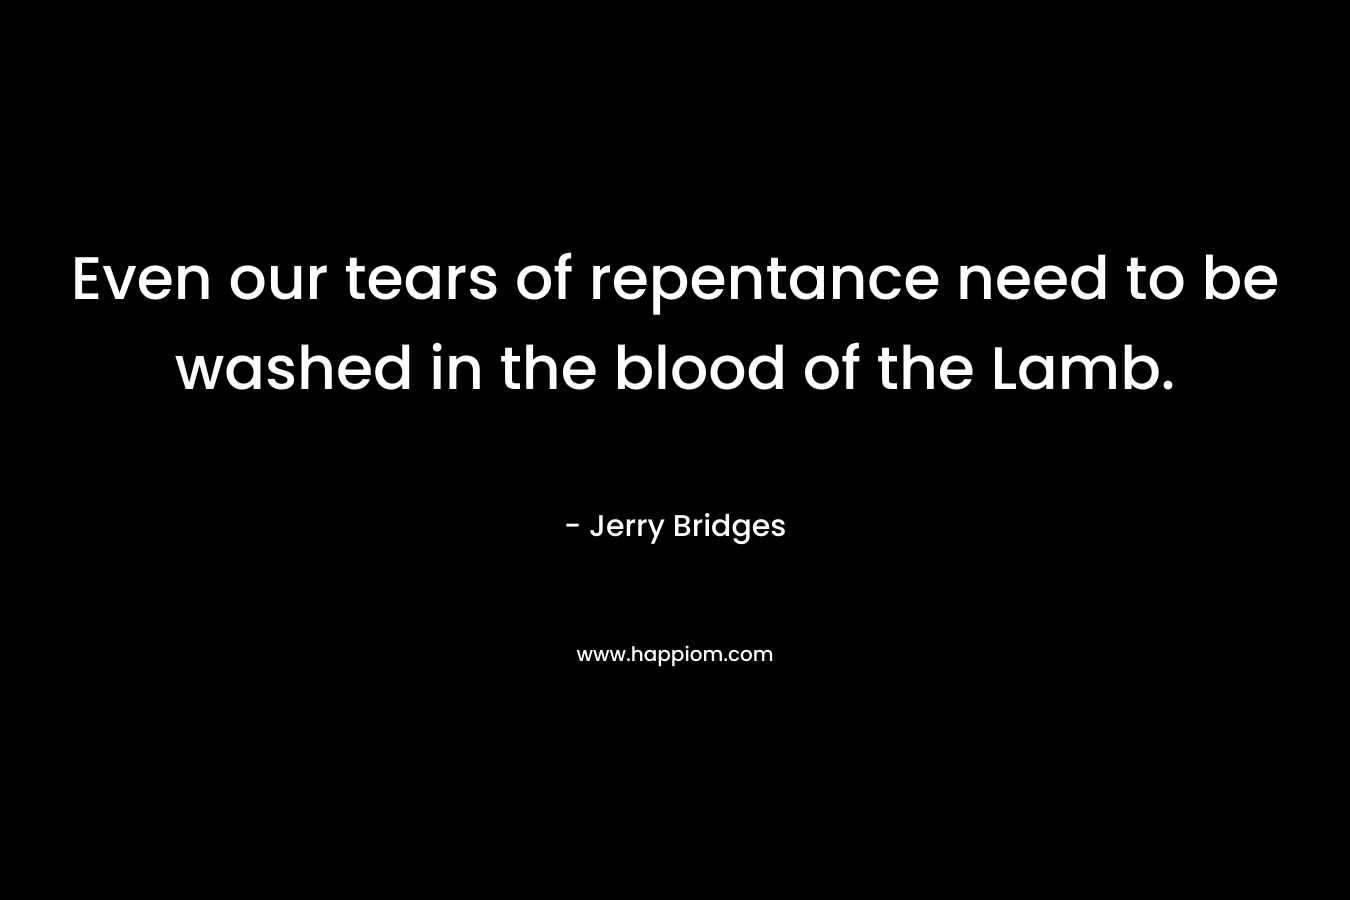 Even our tears of repentance need to be washed in the blood of the Lamb. – Jerry Bridges